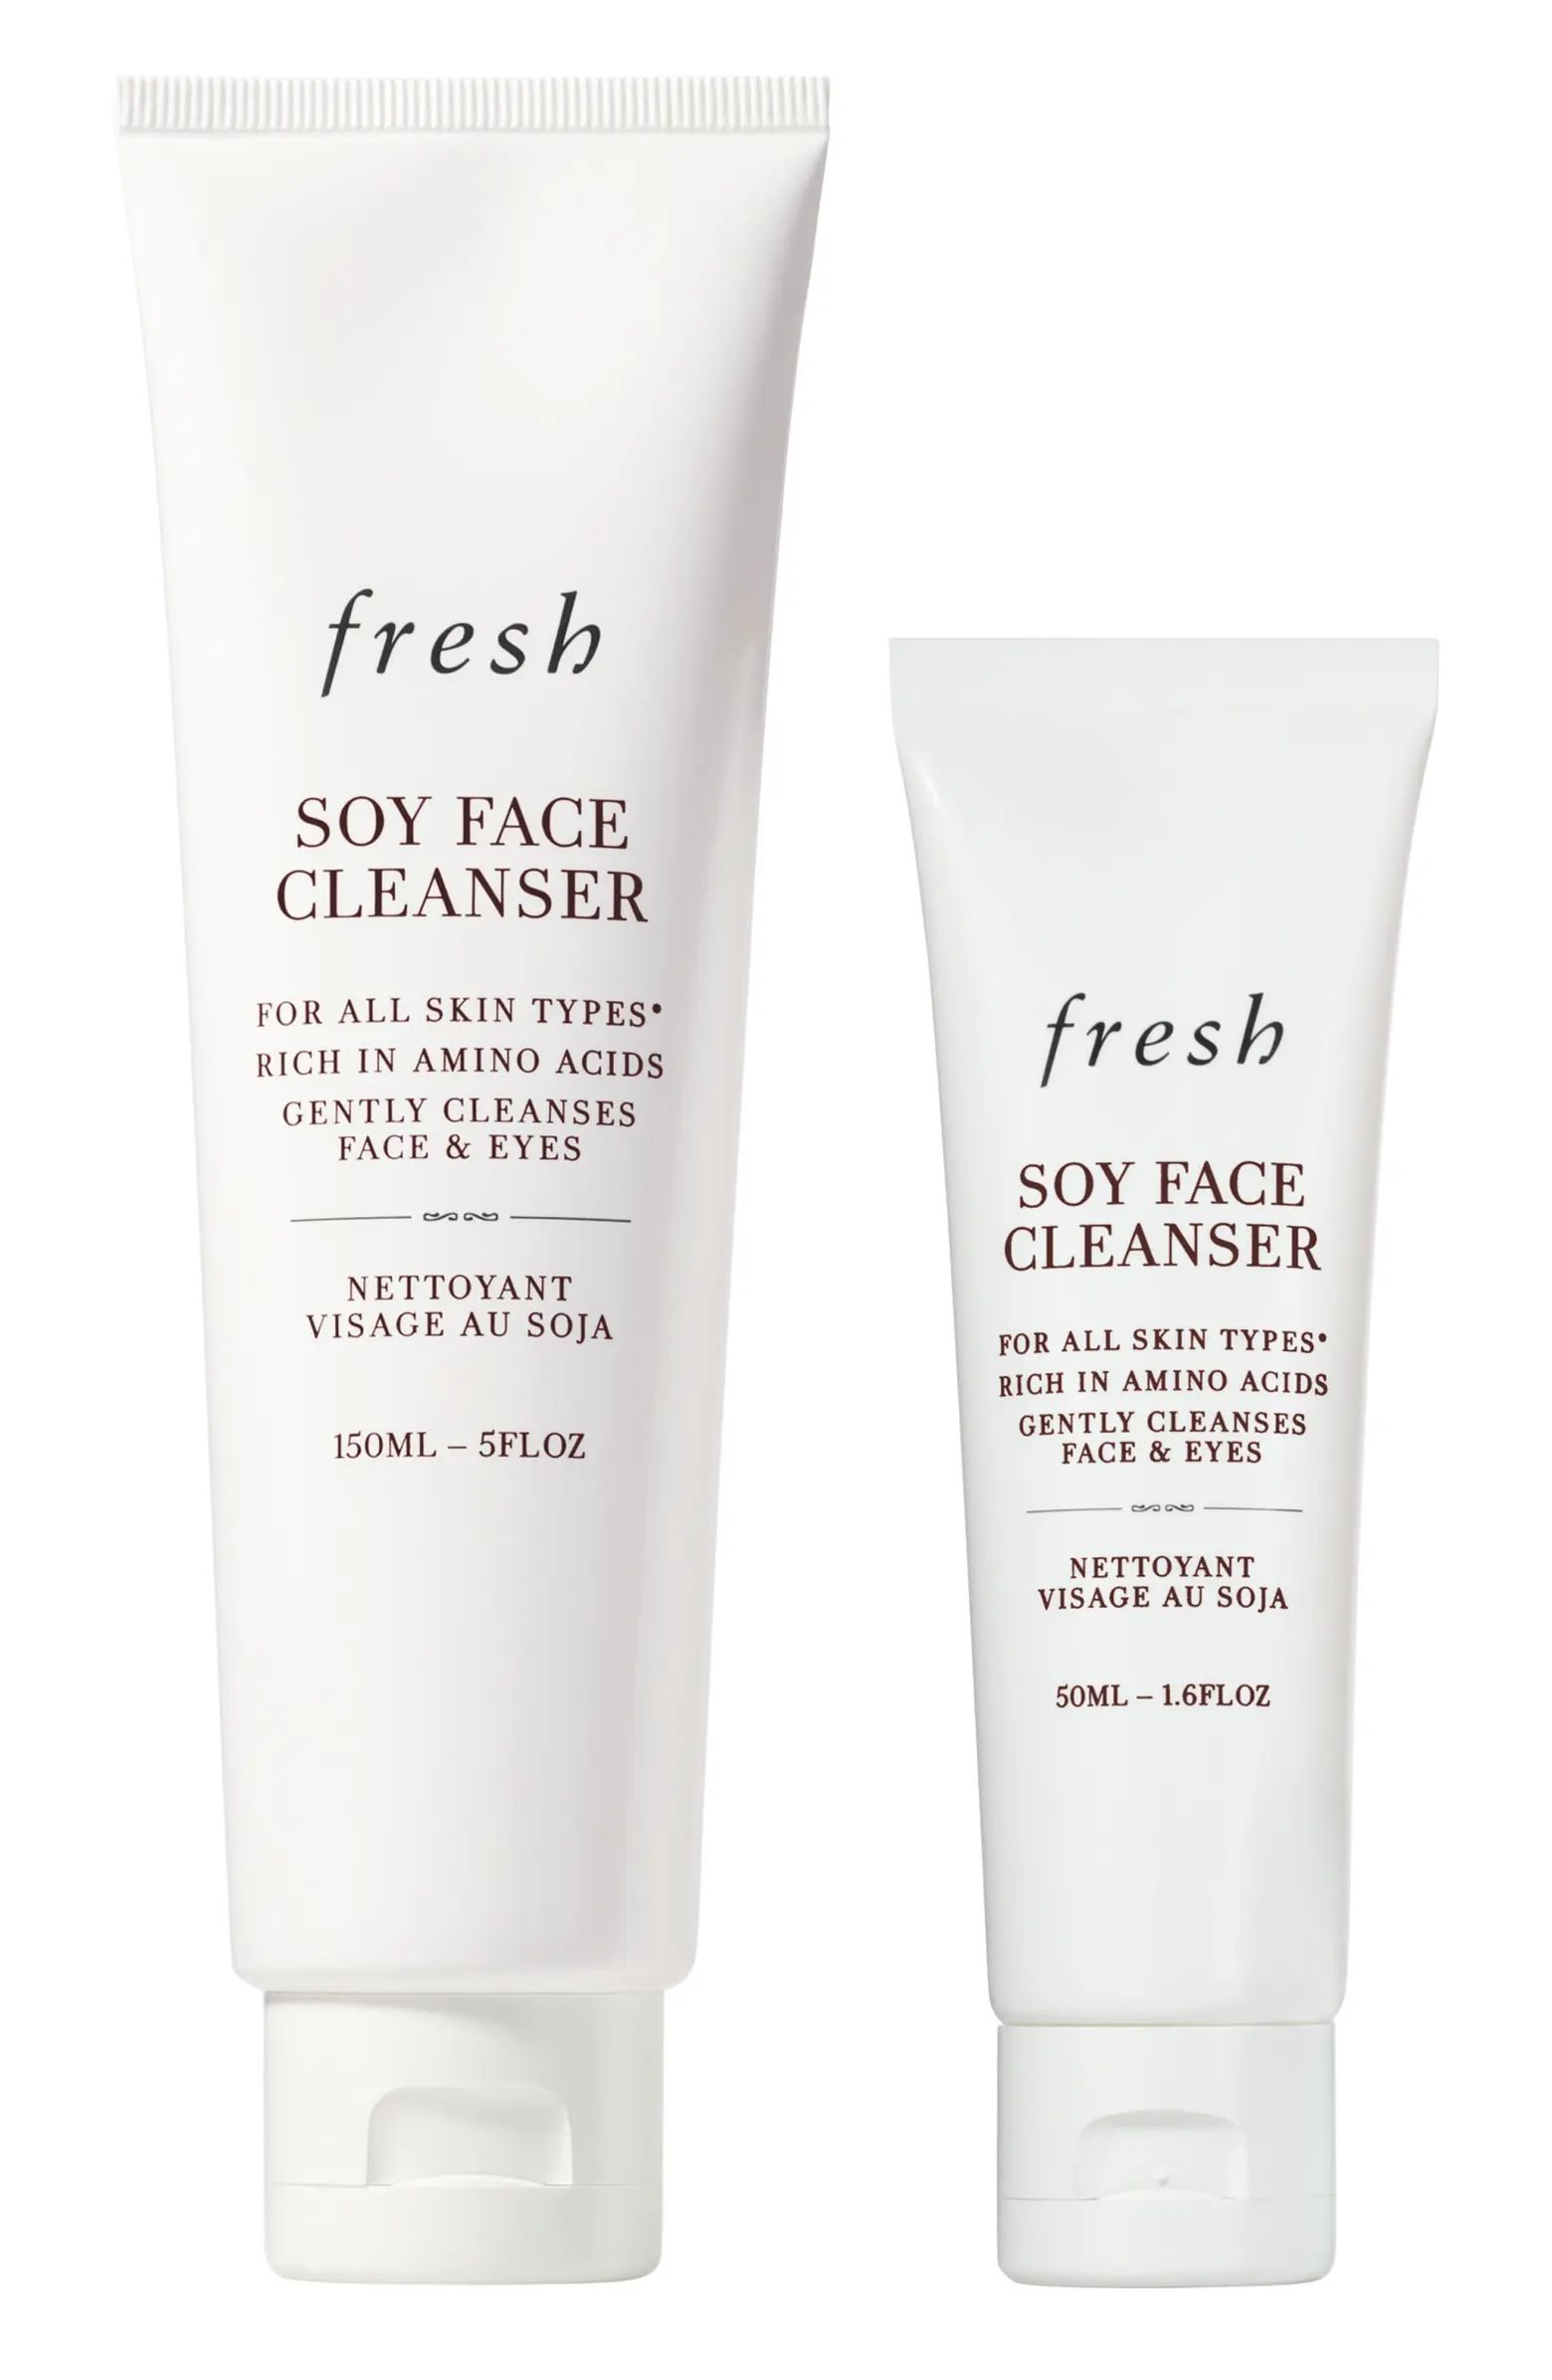 Cleanse Around the Clock Soy Face Cleanser Duo Set $54 Value | Nordstrom